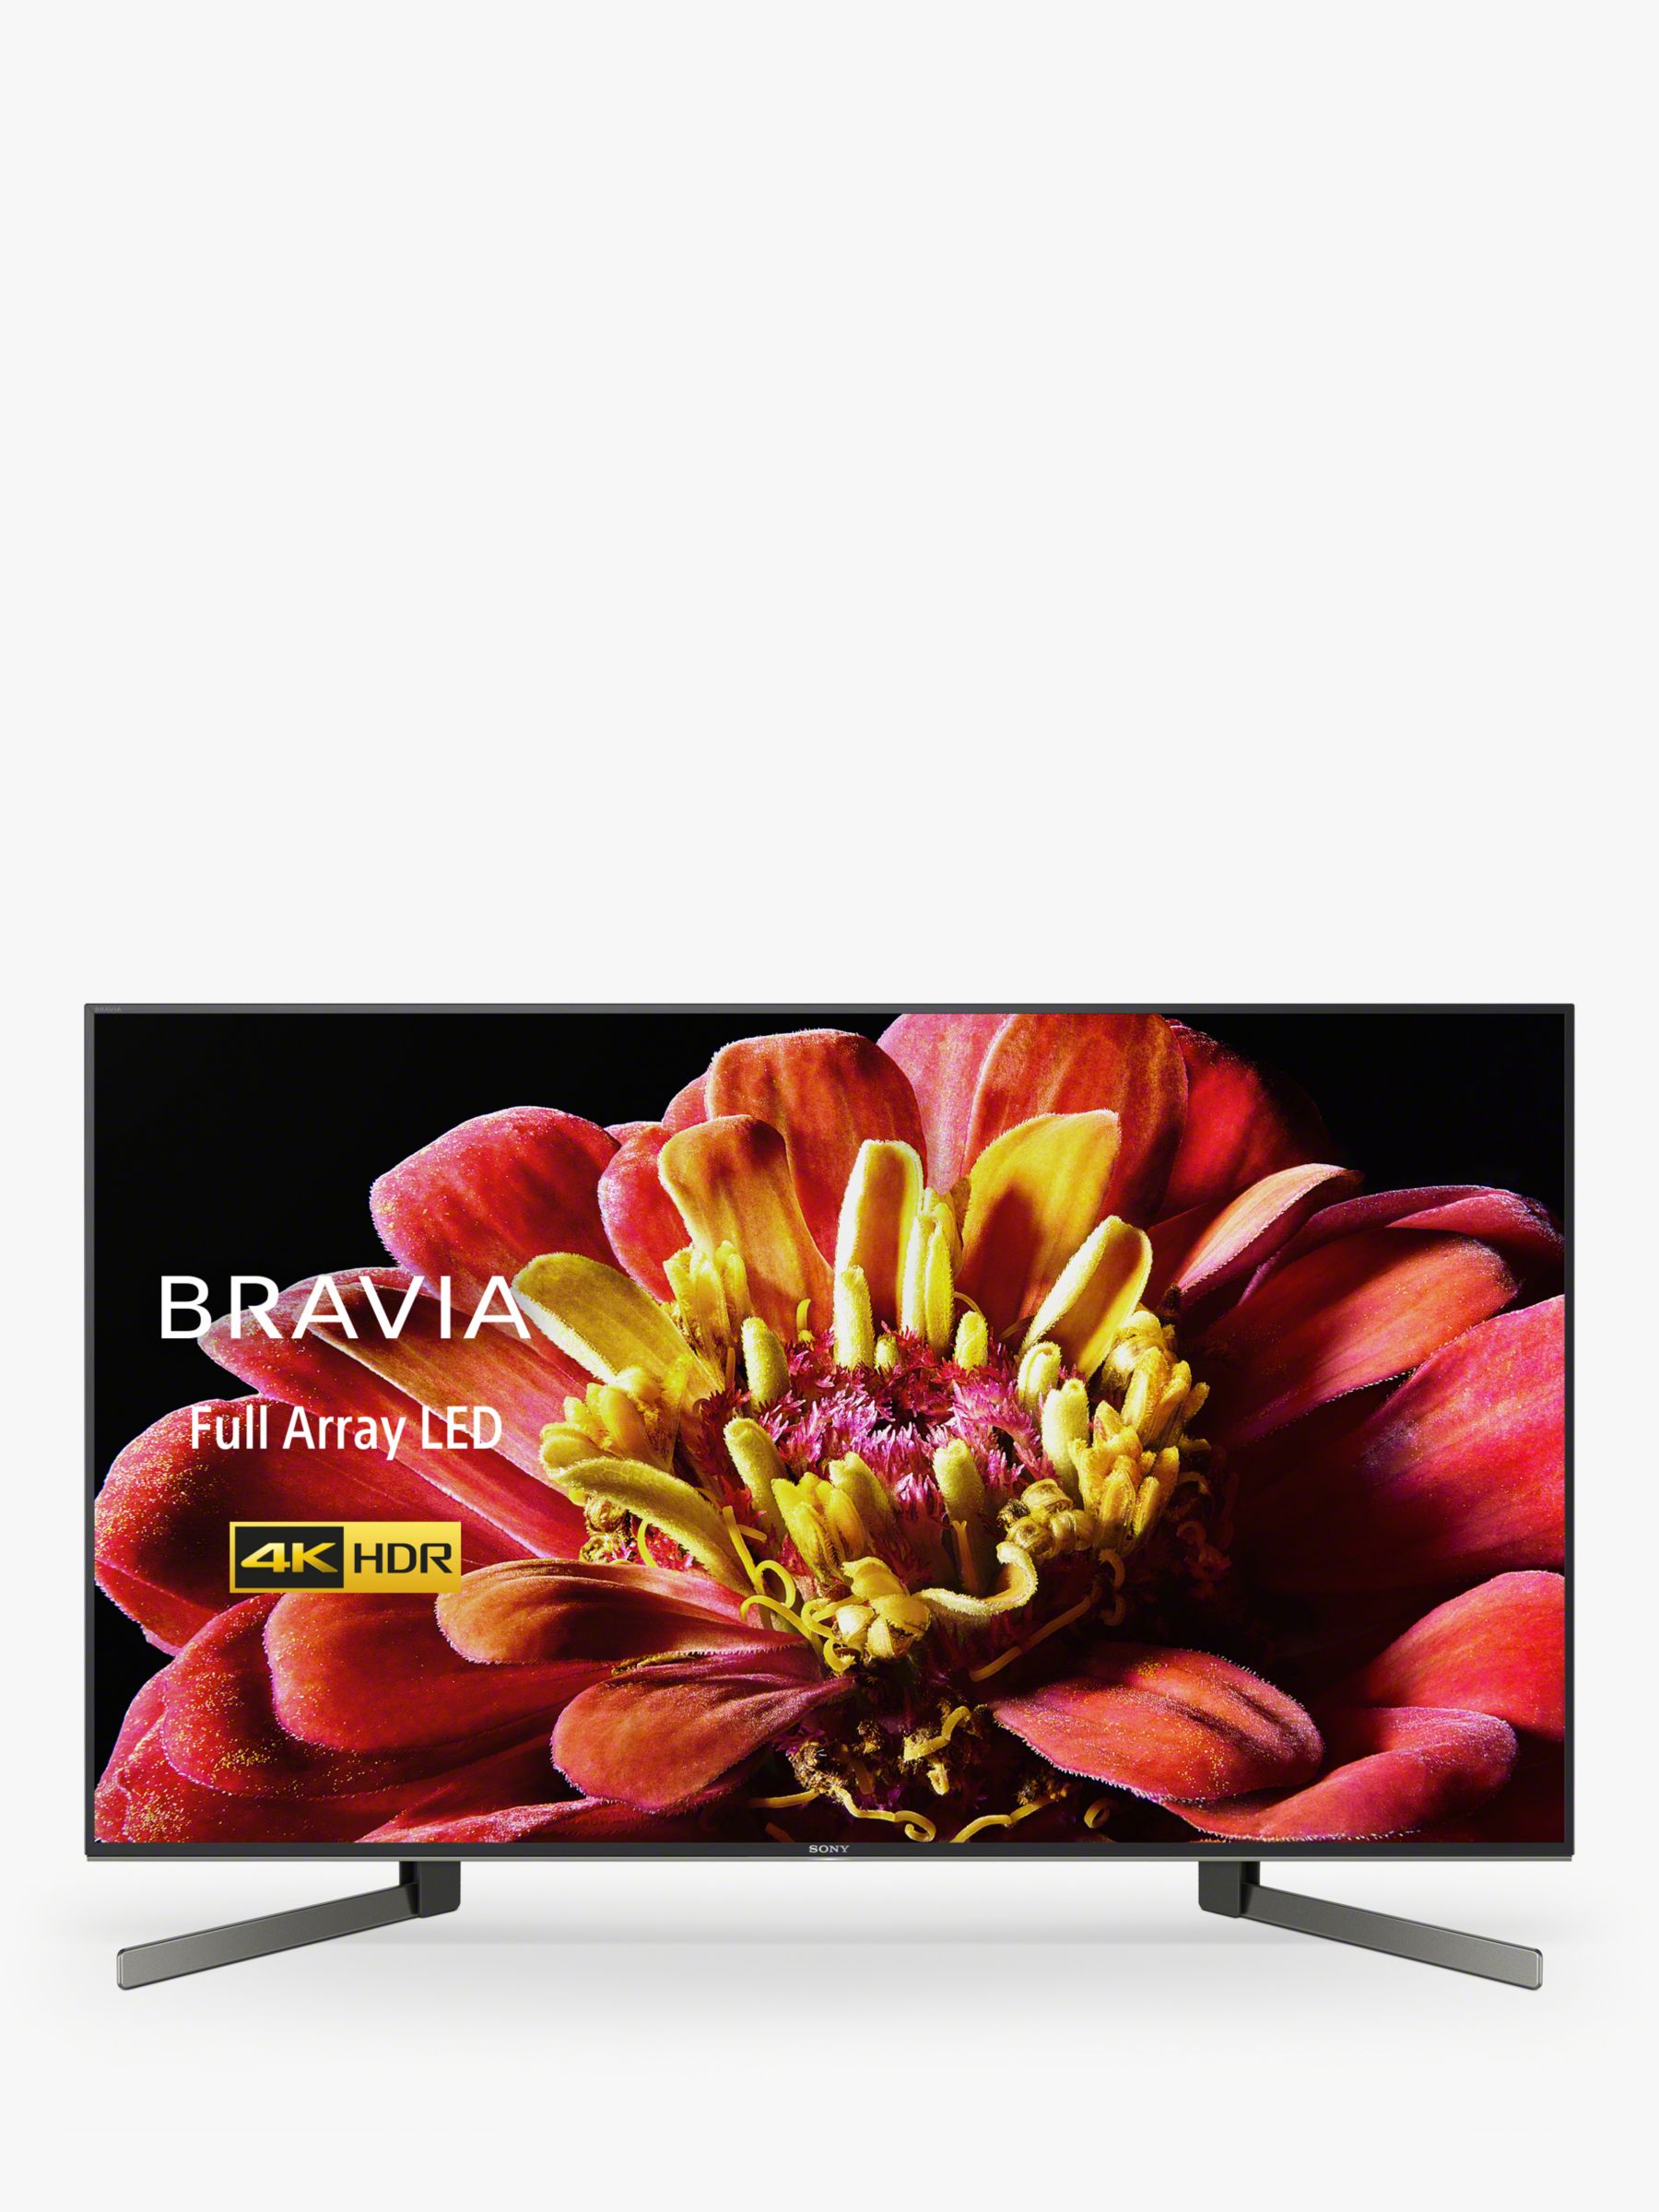 Sony Bravia Kd49xg9005 2019 Led Hdr 4k Ultra Hd Smart Android Tv